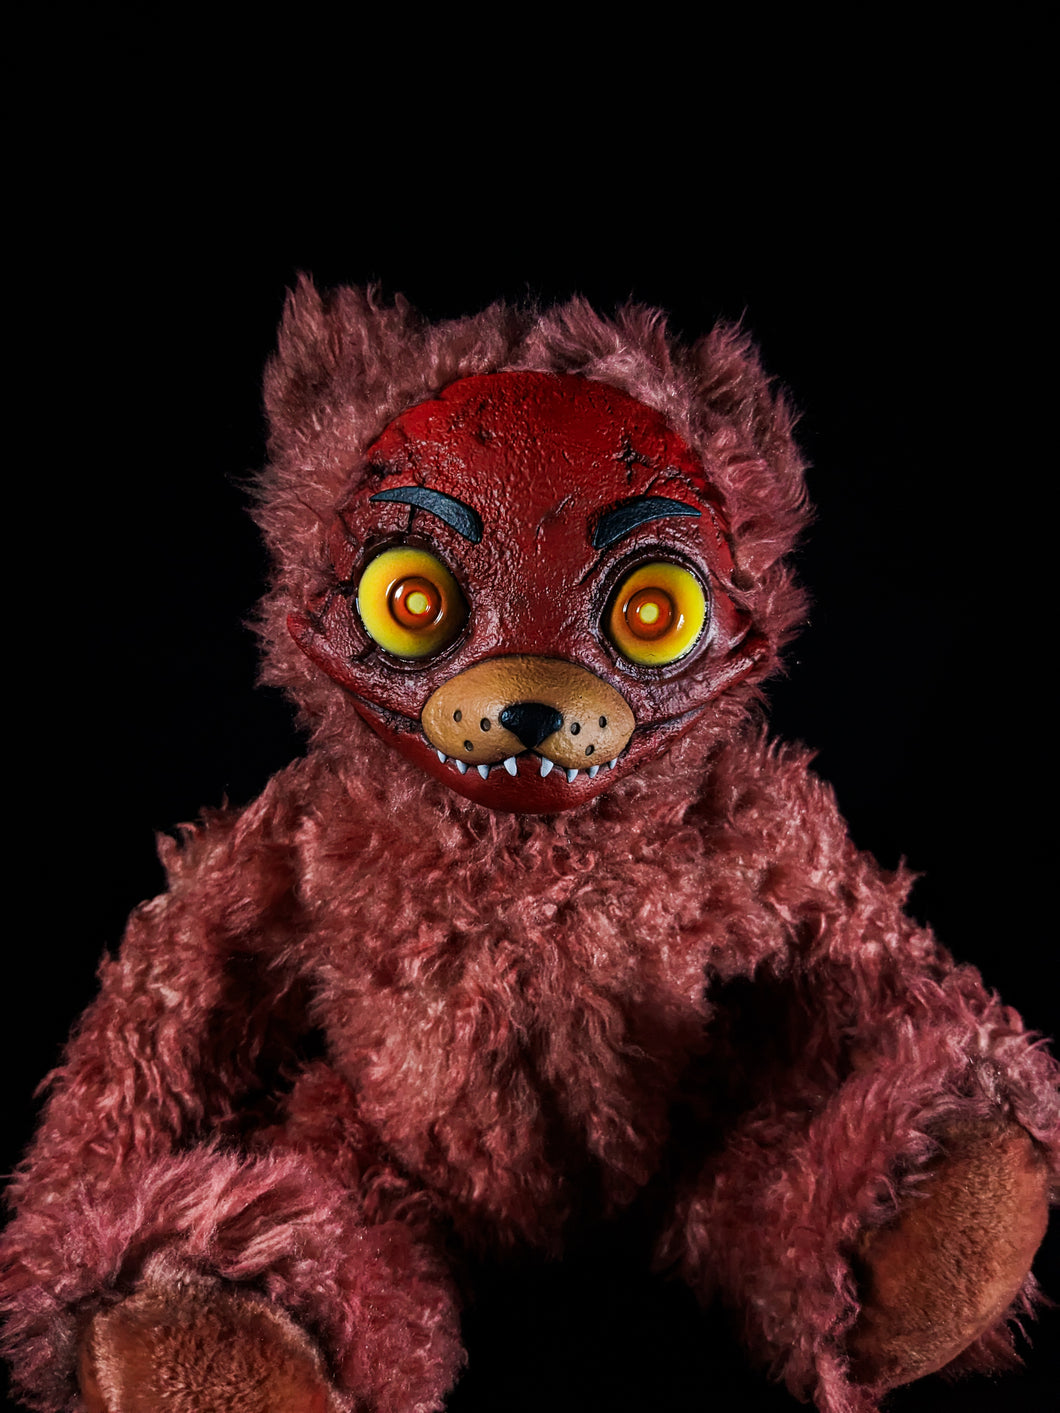 Withered Foxy: FREDBEARZ - Five Nights at Freddy's Inspired CRYPTCRITZ